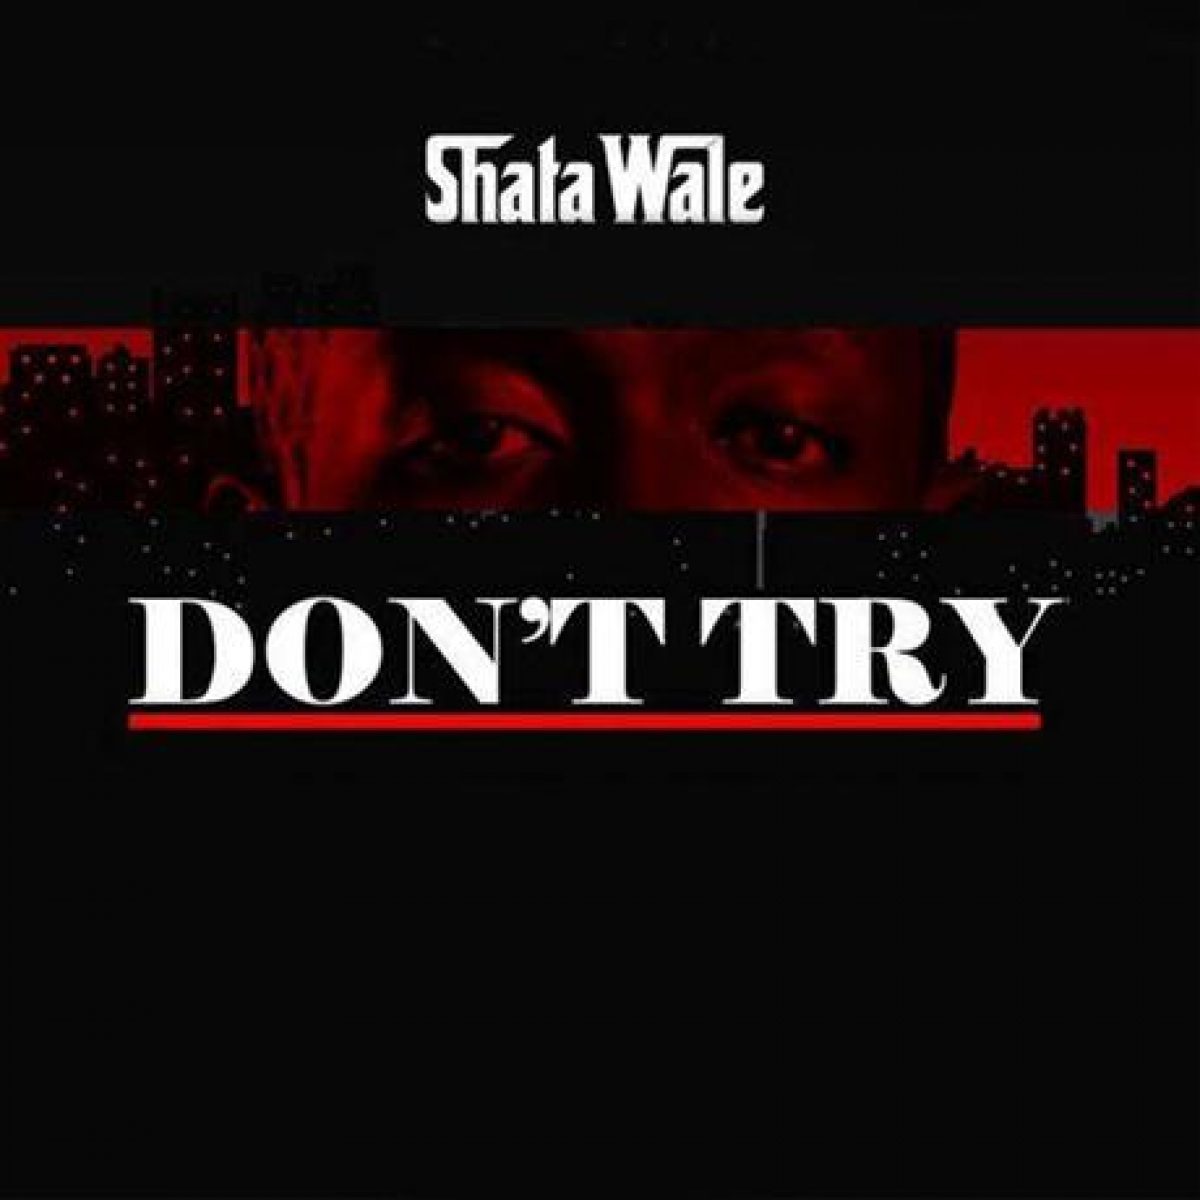 Shatta Wale – Don't Try (Criss Waddle Diss)